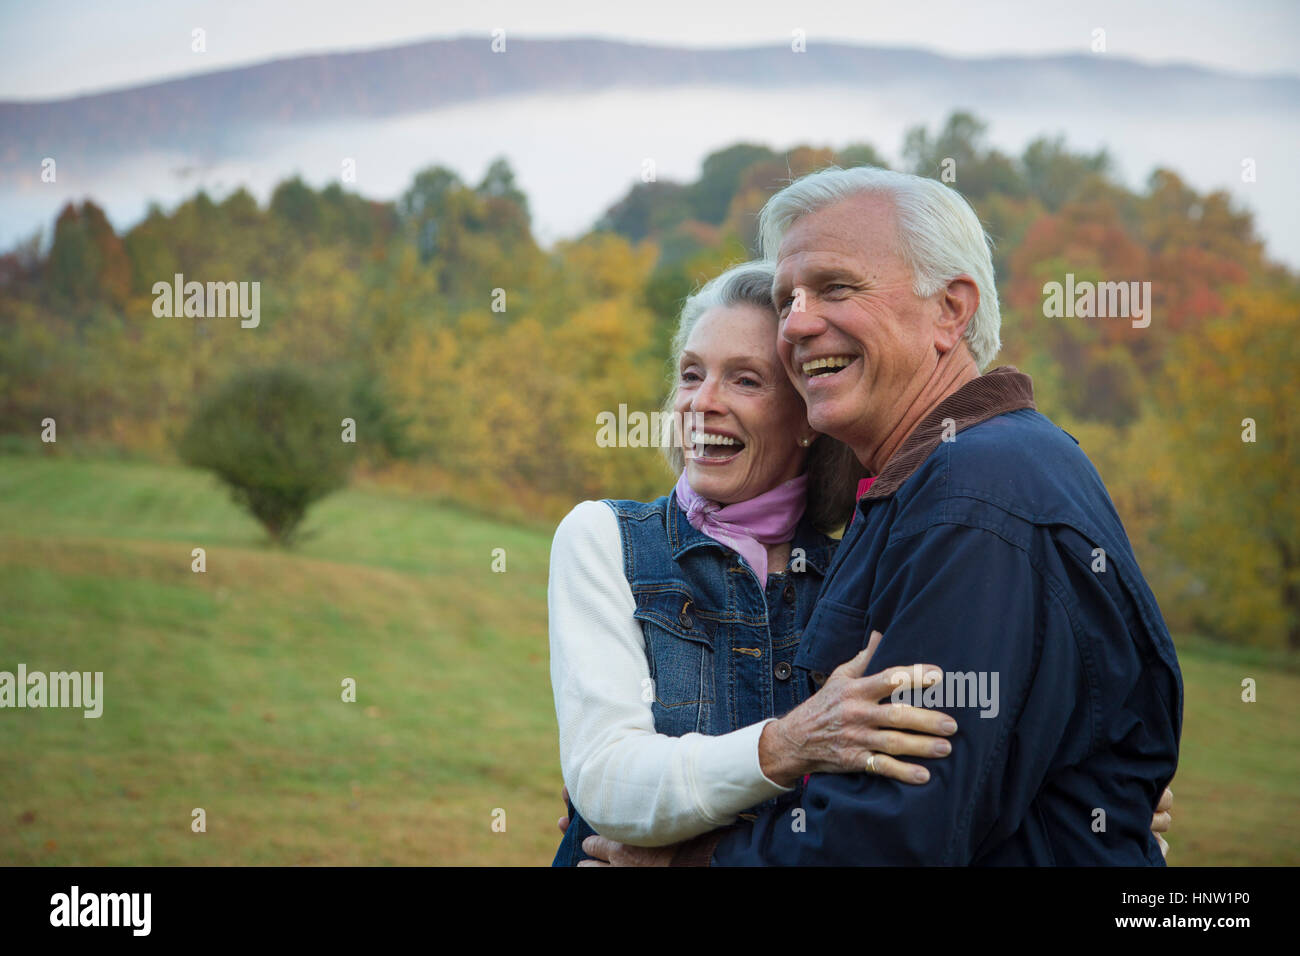 Caucasian couple hugging in field Banque D'Images